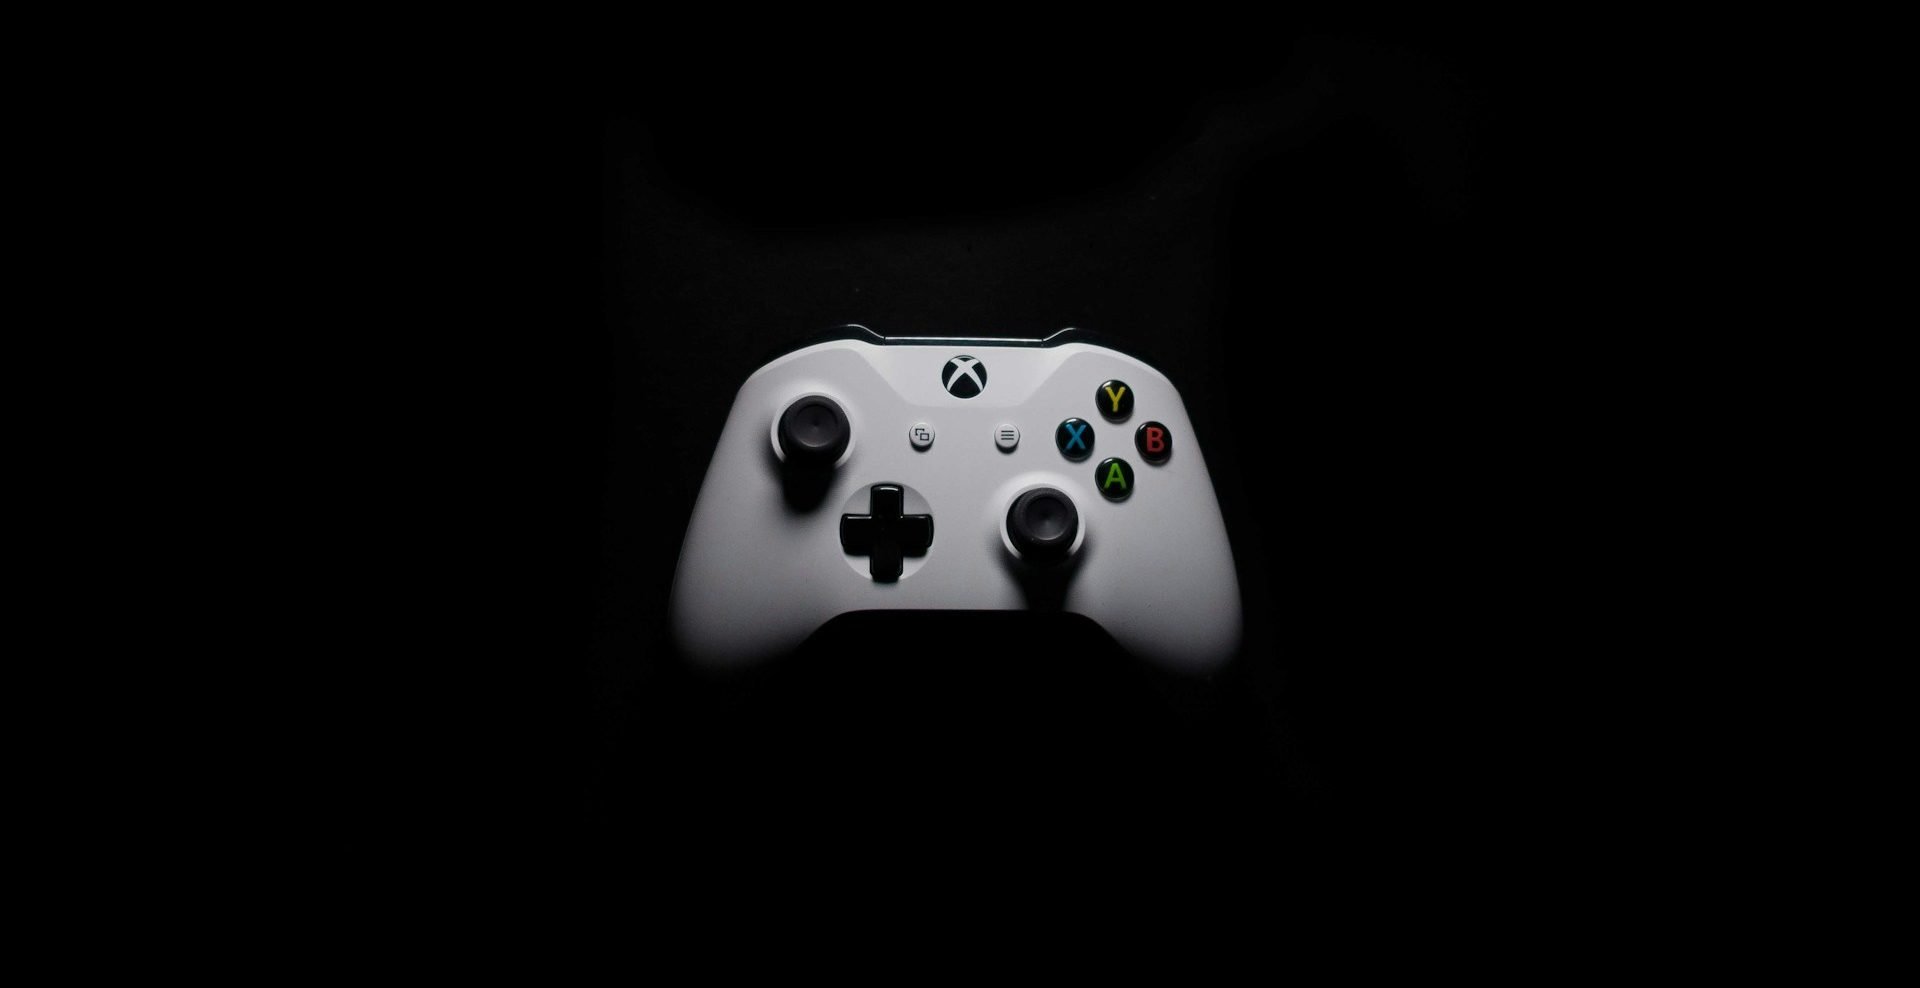 The Future of Xbox Shows Similarities to PC Gaming